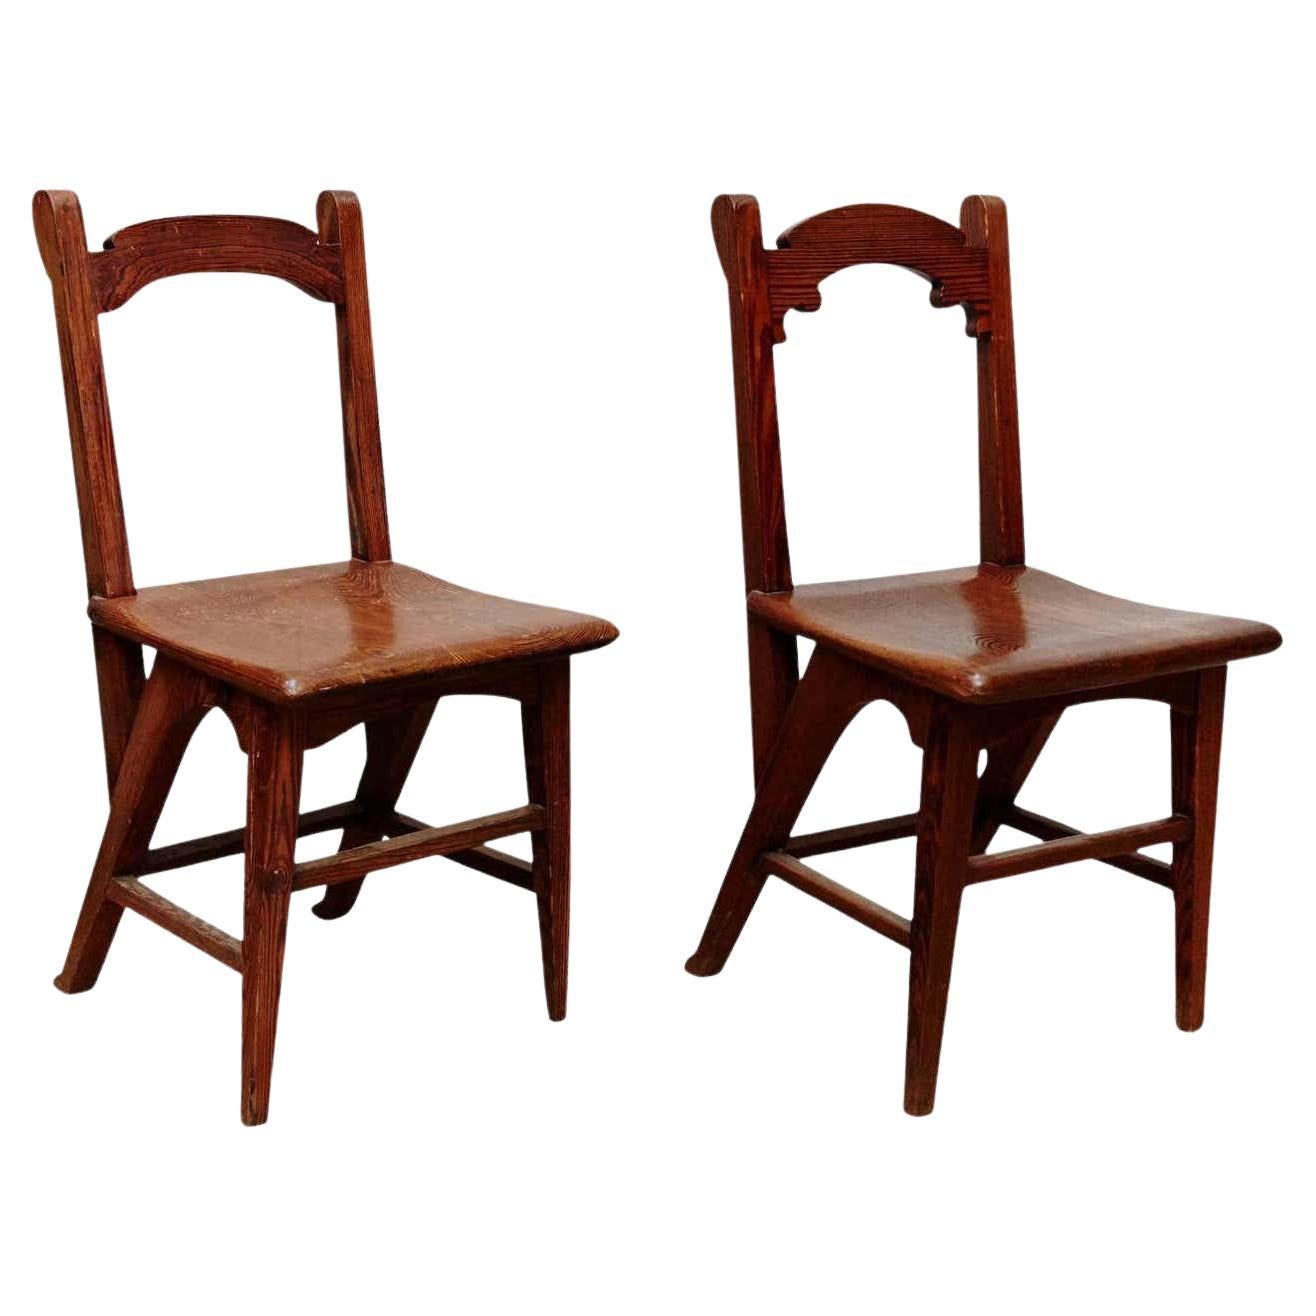 Pair of Catalan Modernist Wooden Chairs, circa 1920